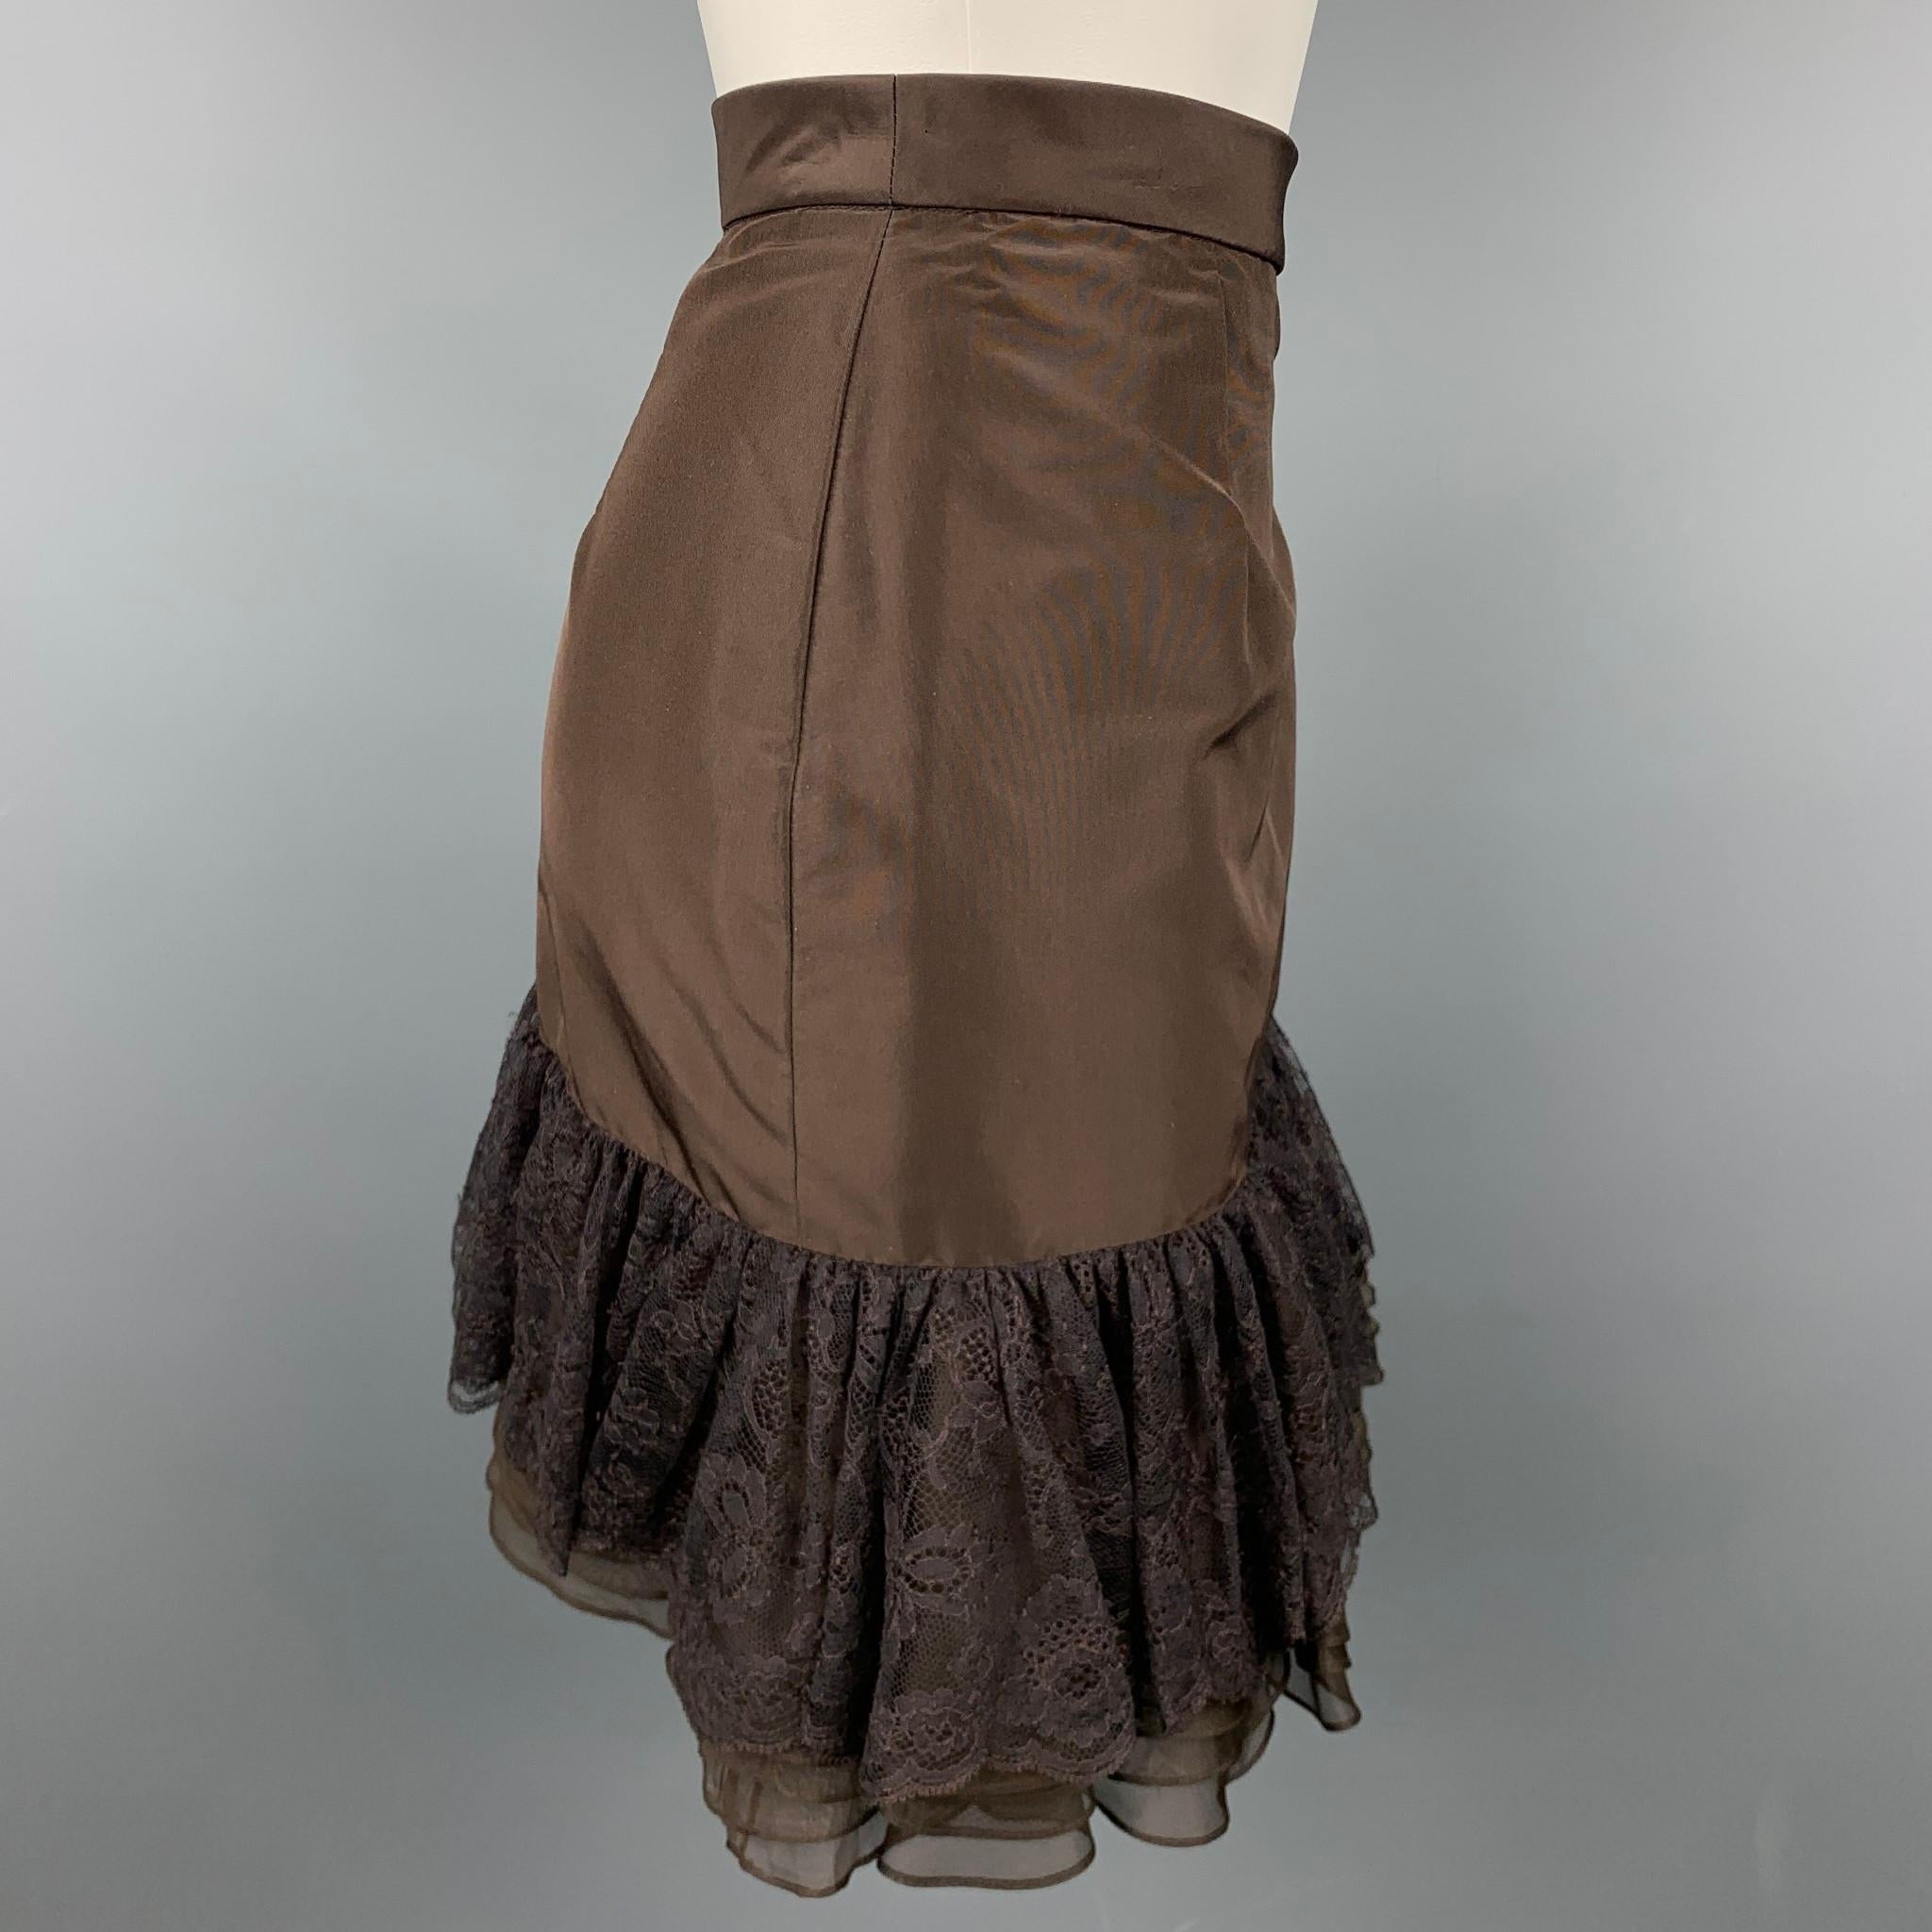 PETROU skirt comes in a chocolate brown silk with mixed materials featuring a petite waistband, clasp closure at side, lace ruffle, and a side zipper closure. 

Excellent Pre- Owned Condition.

Measurements:

Waist: 26 in.
Hips: 36 in.
Length: 19 in.